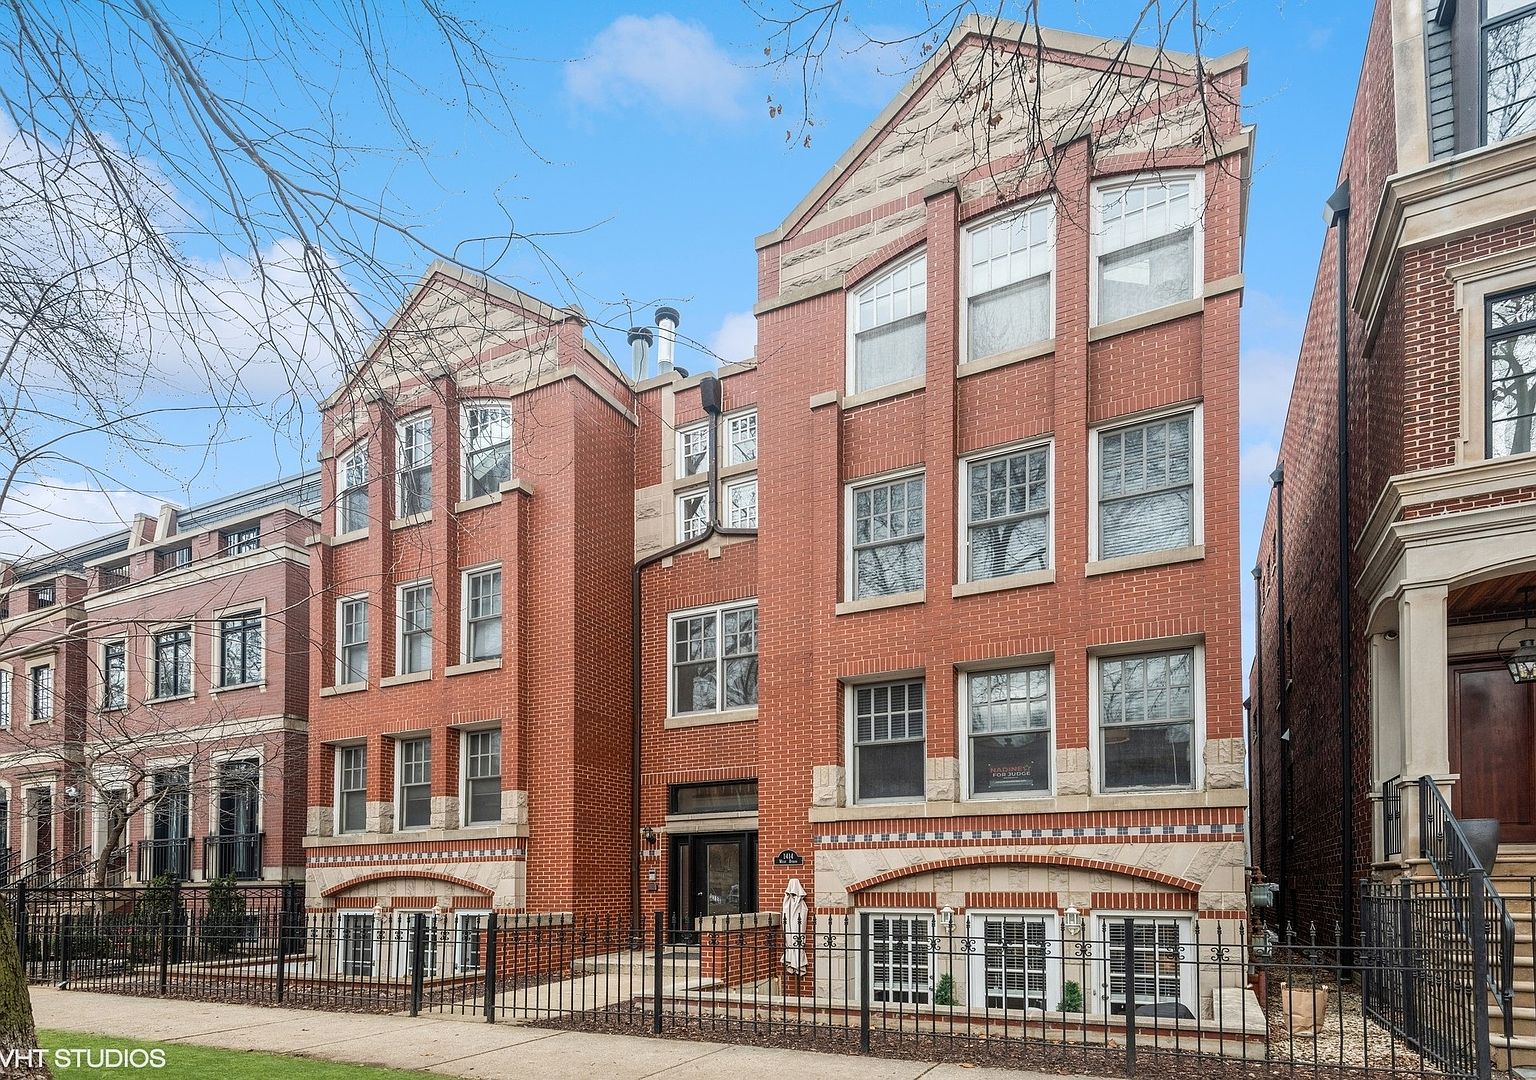 1414 W Byron St, Chicago, IL 60613 MLS #11969212 Zillow, 41% OFF